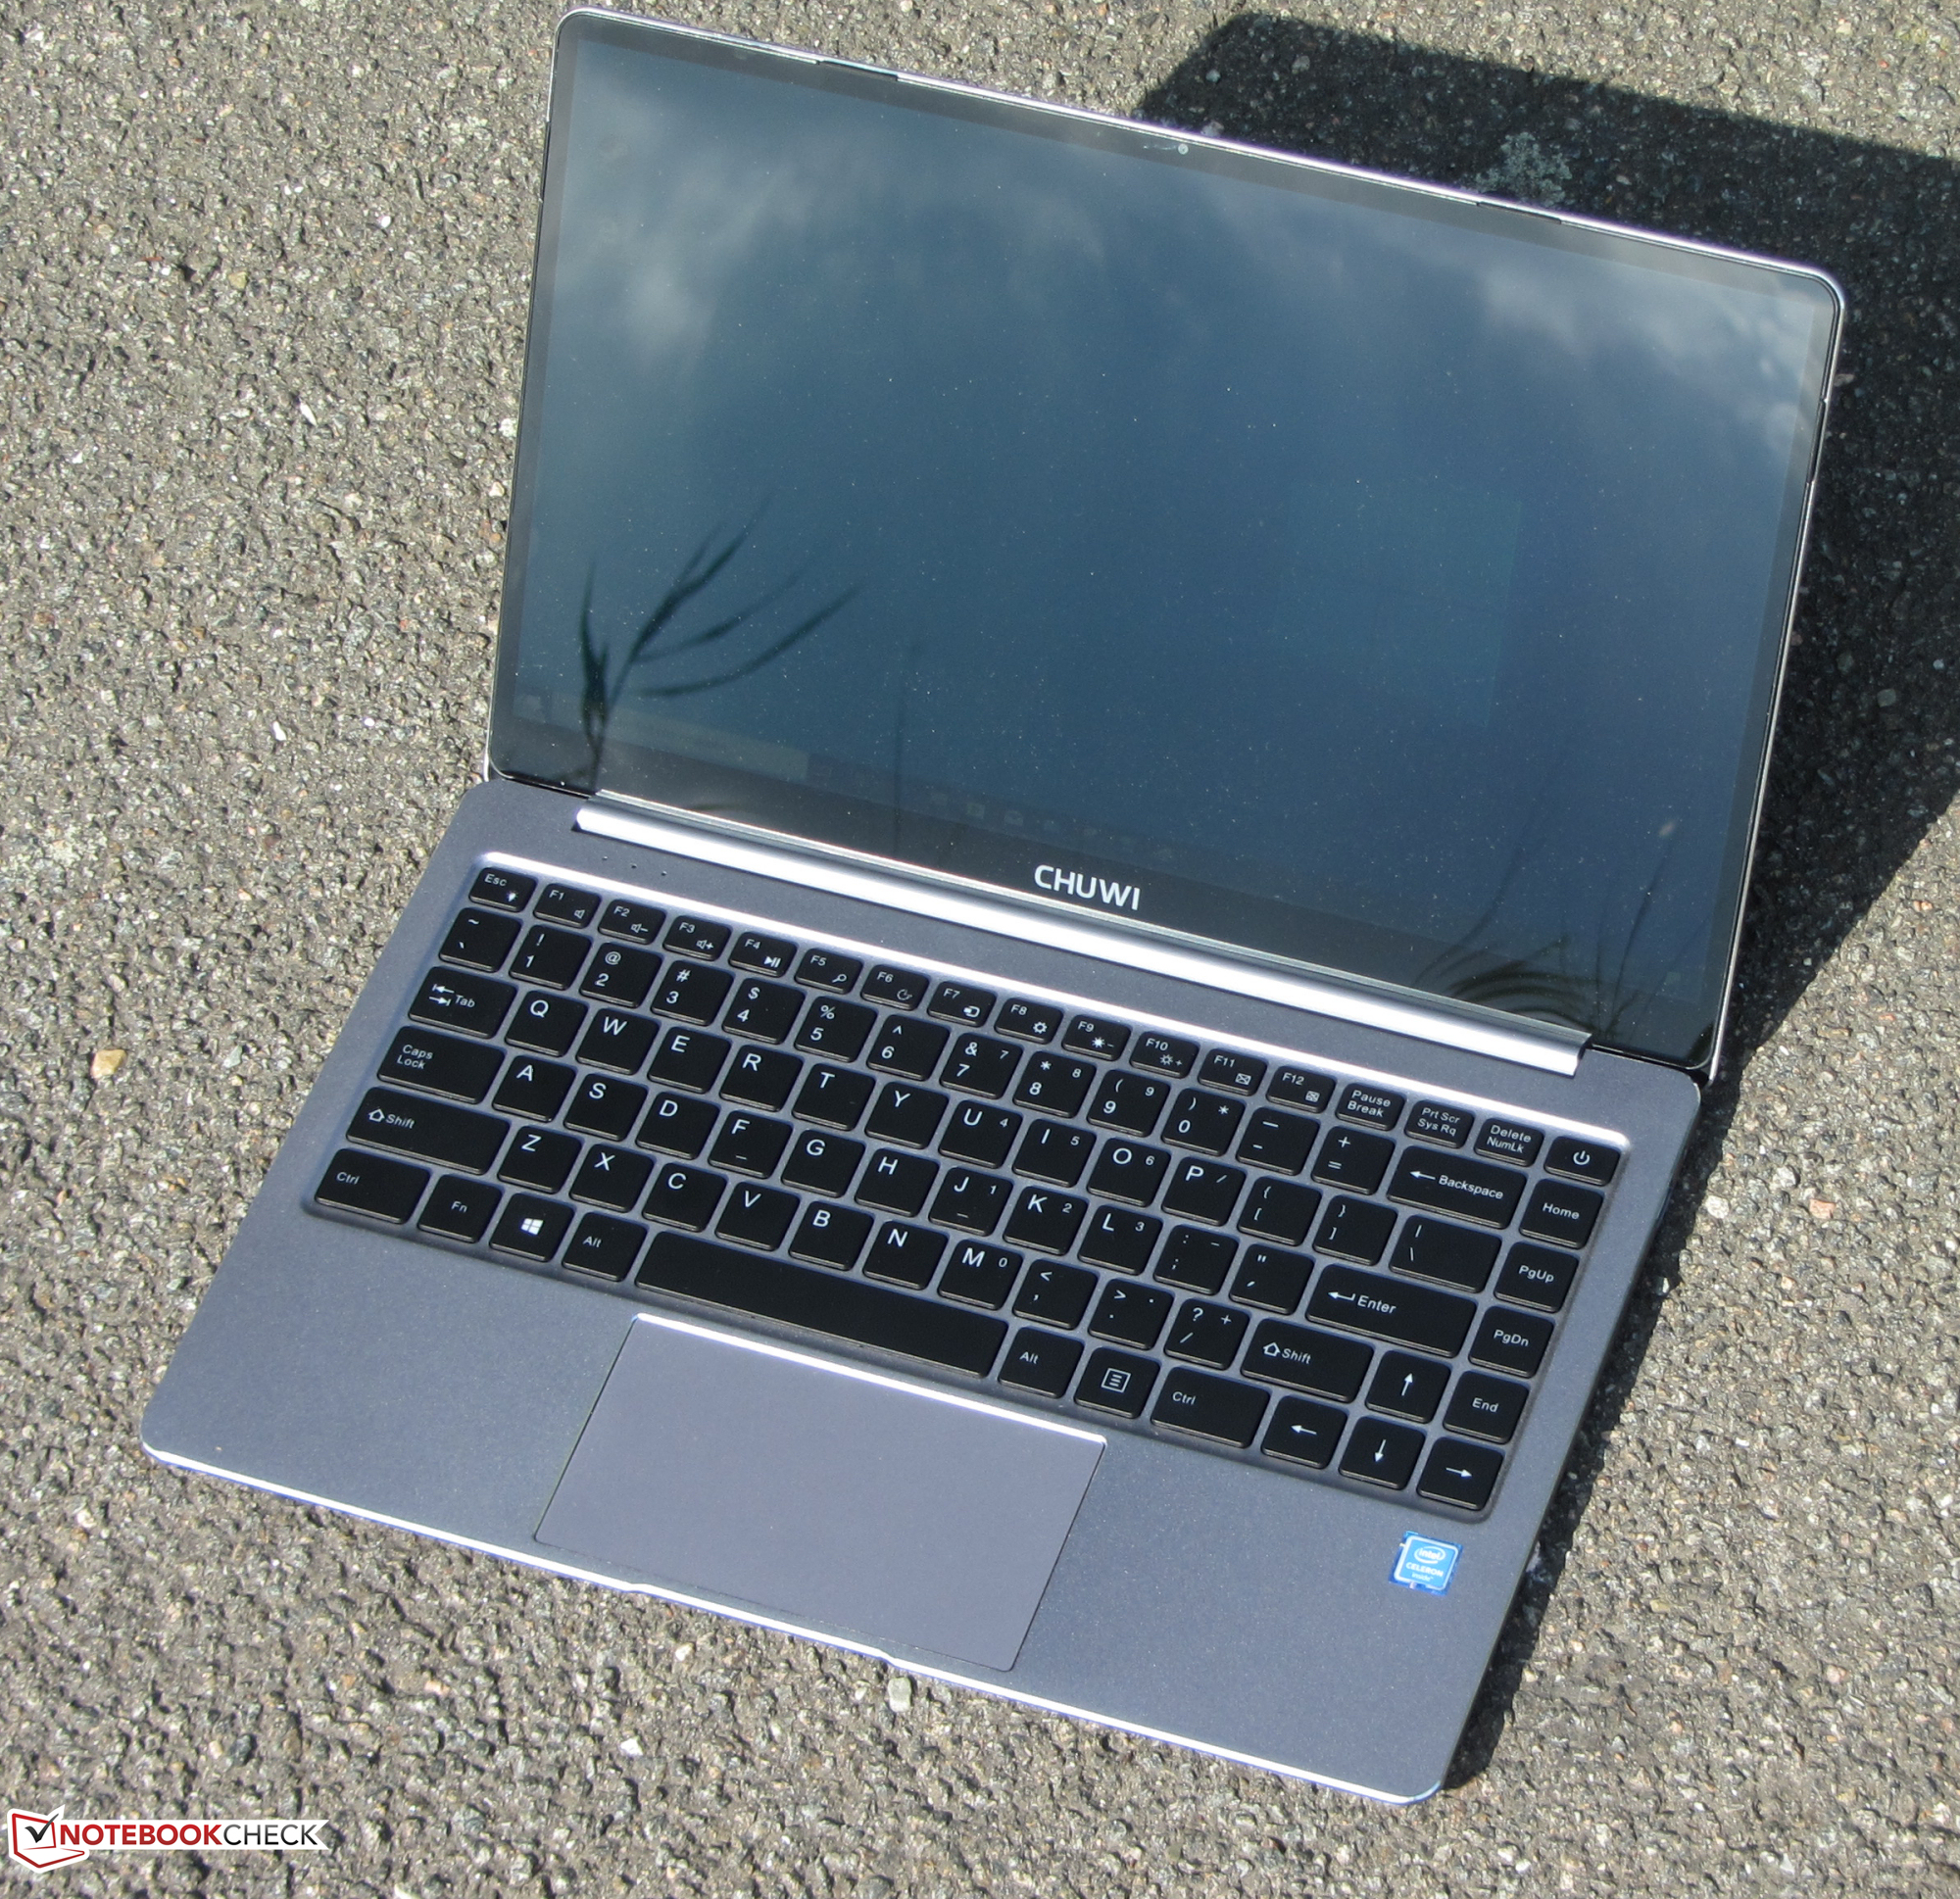 Chuwi LapBook Pro Laptop Review: An affordable 14-inch laptop with 